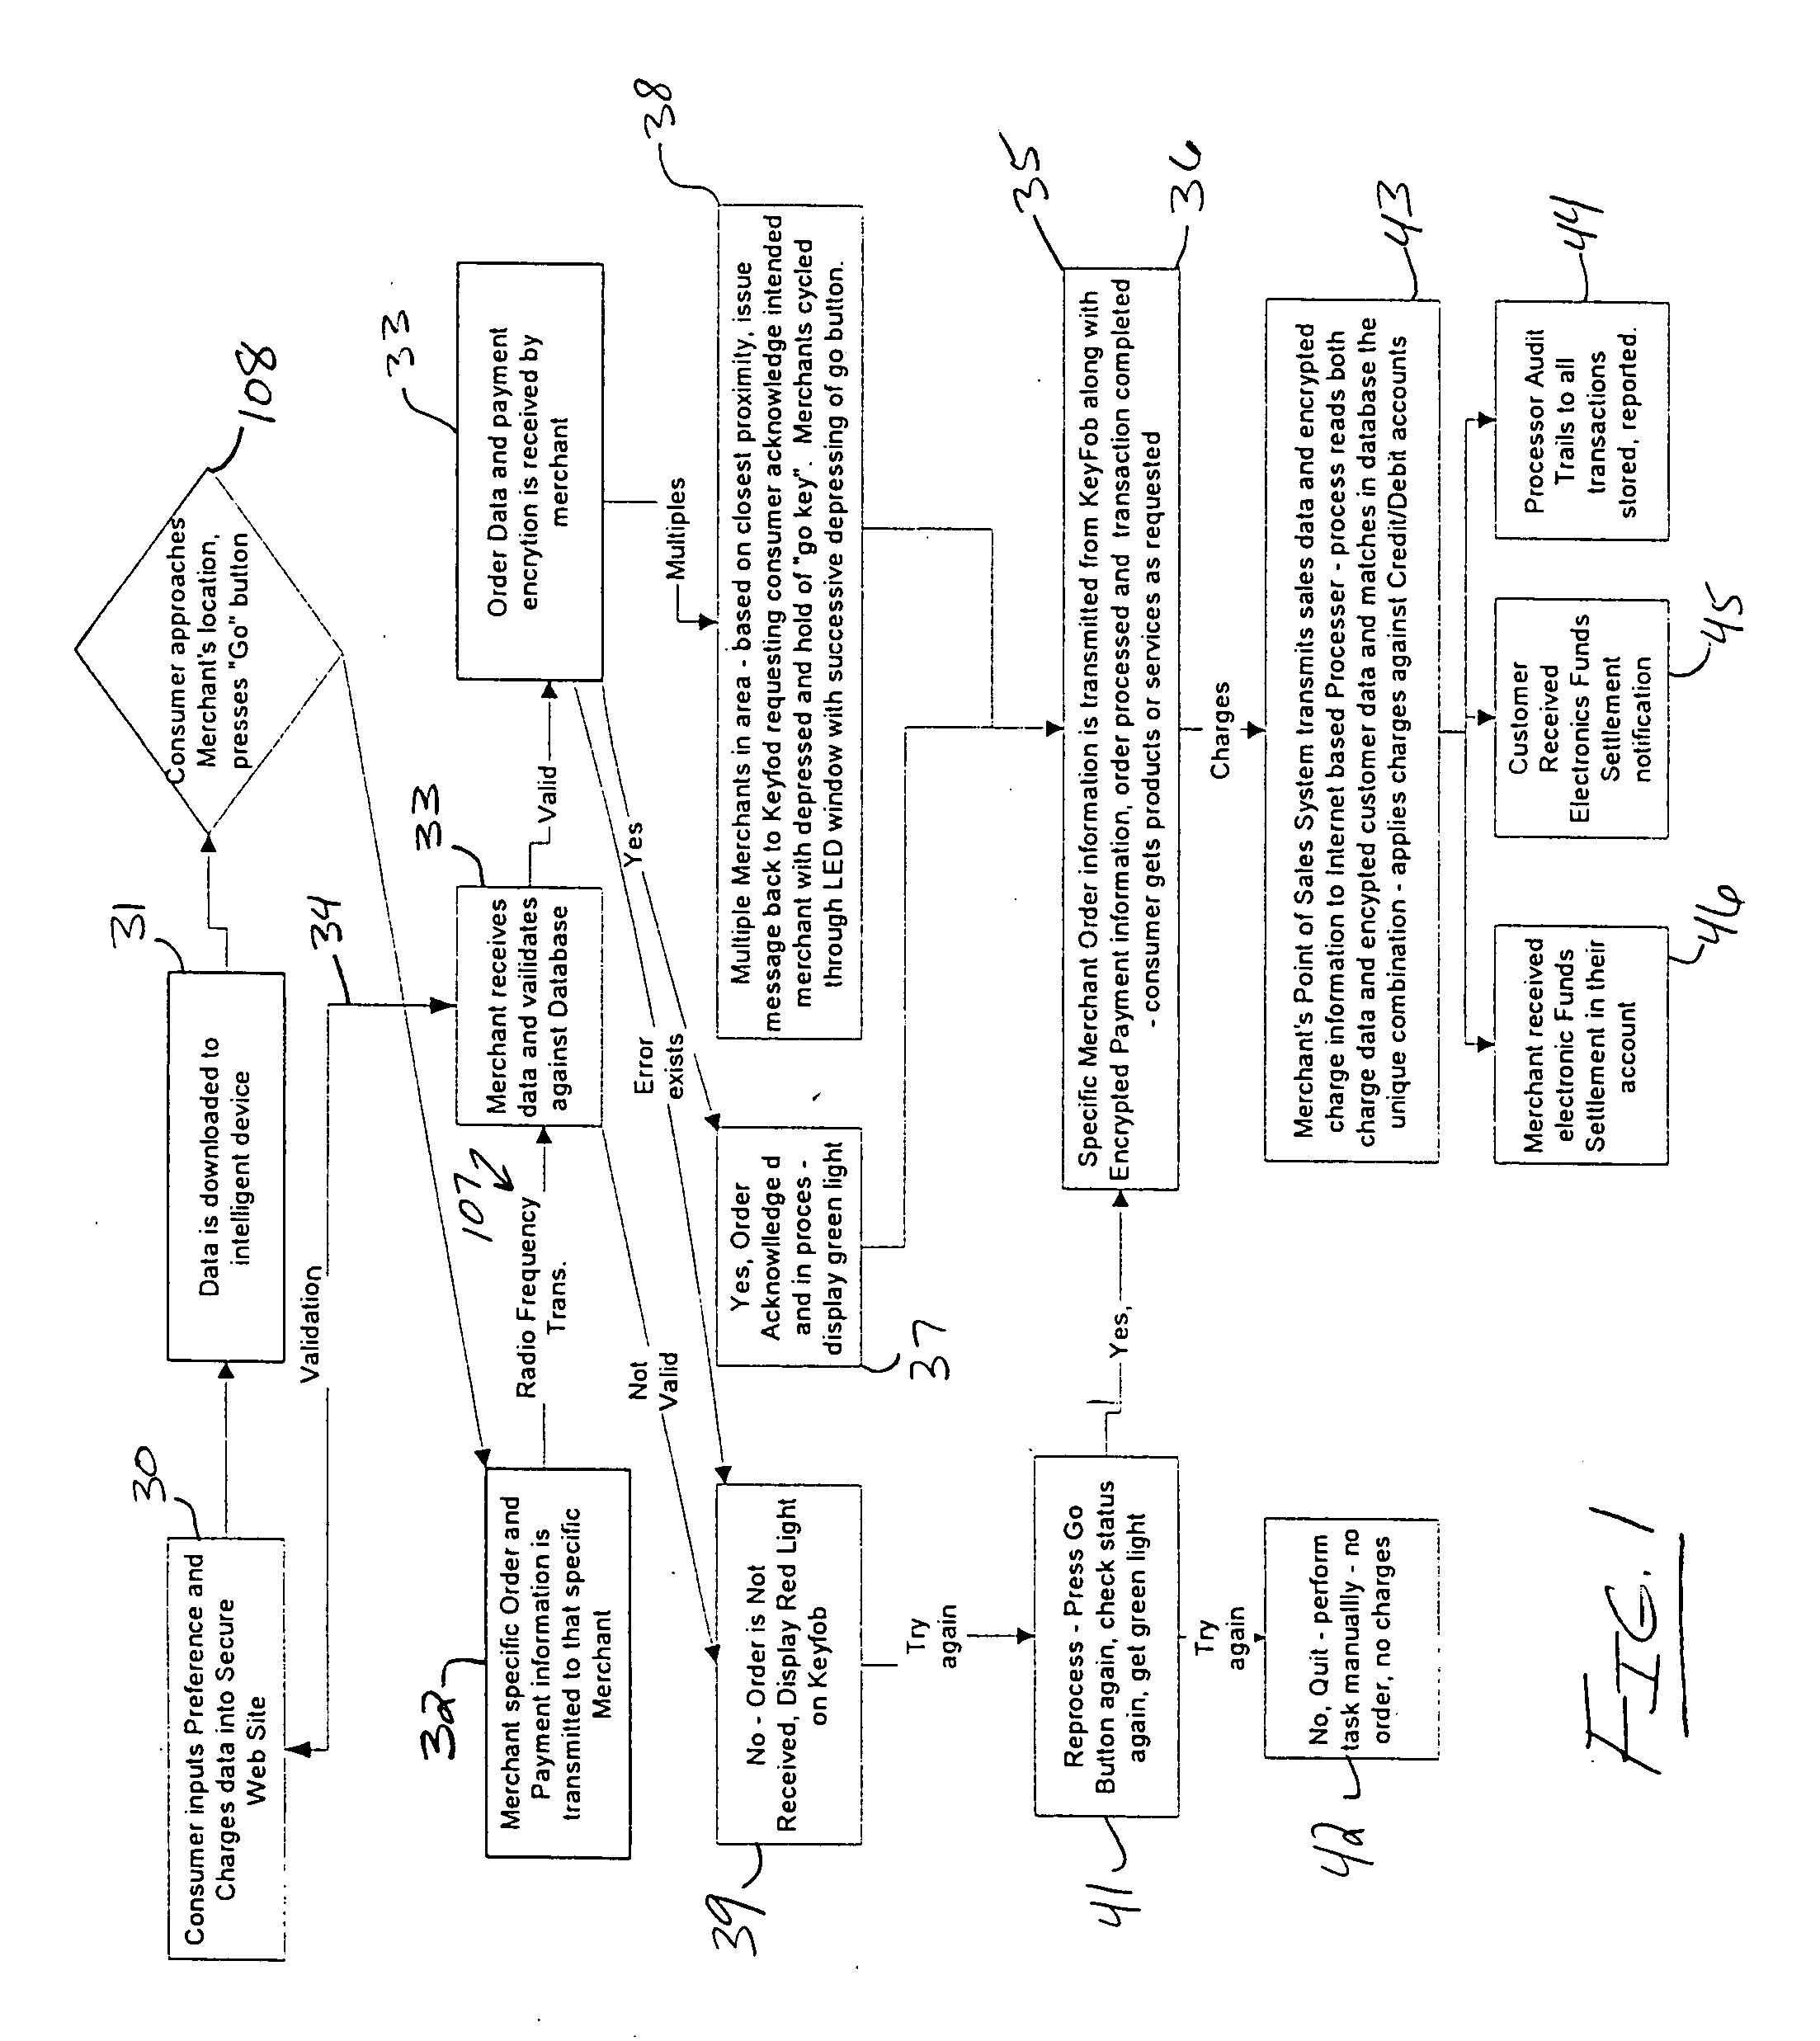 System and method for personalized e-commerce and information communications